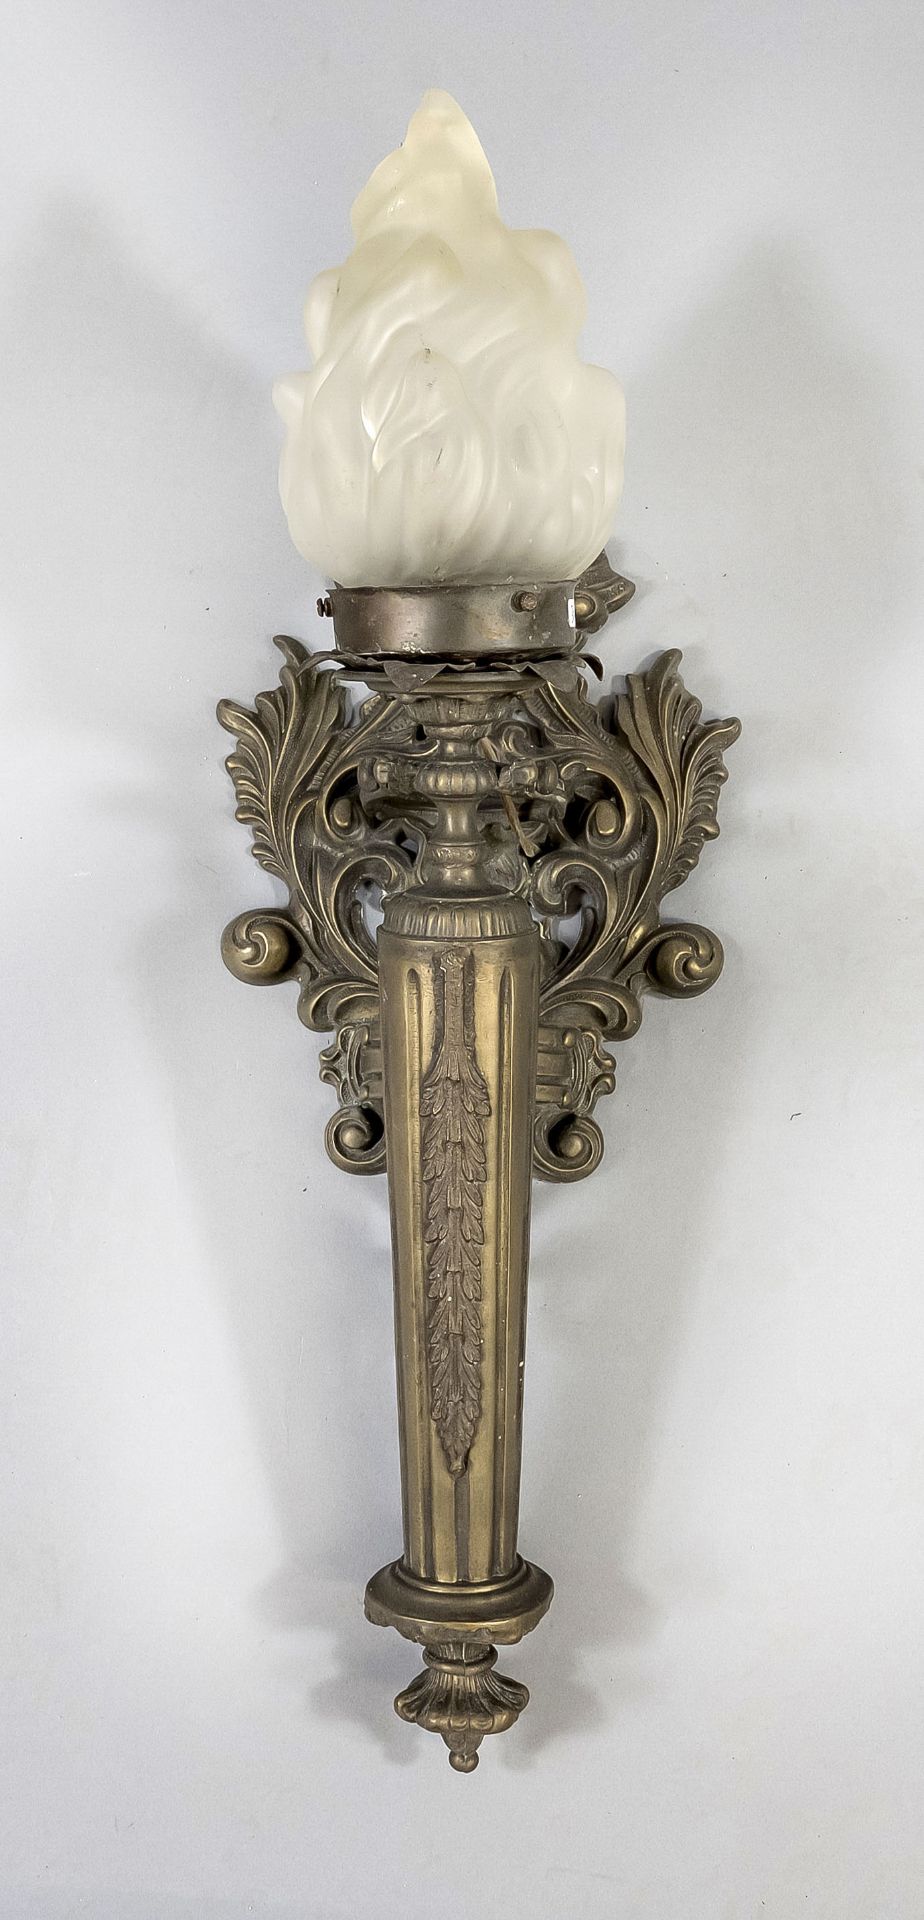 Wall lamp, 20th century, white metal. Open-worked and ornamented wall plinth, with a torch attached.